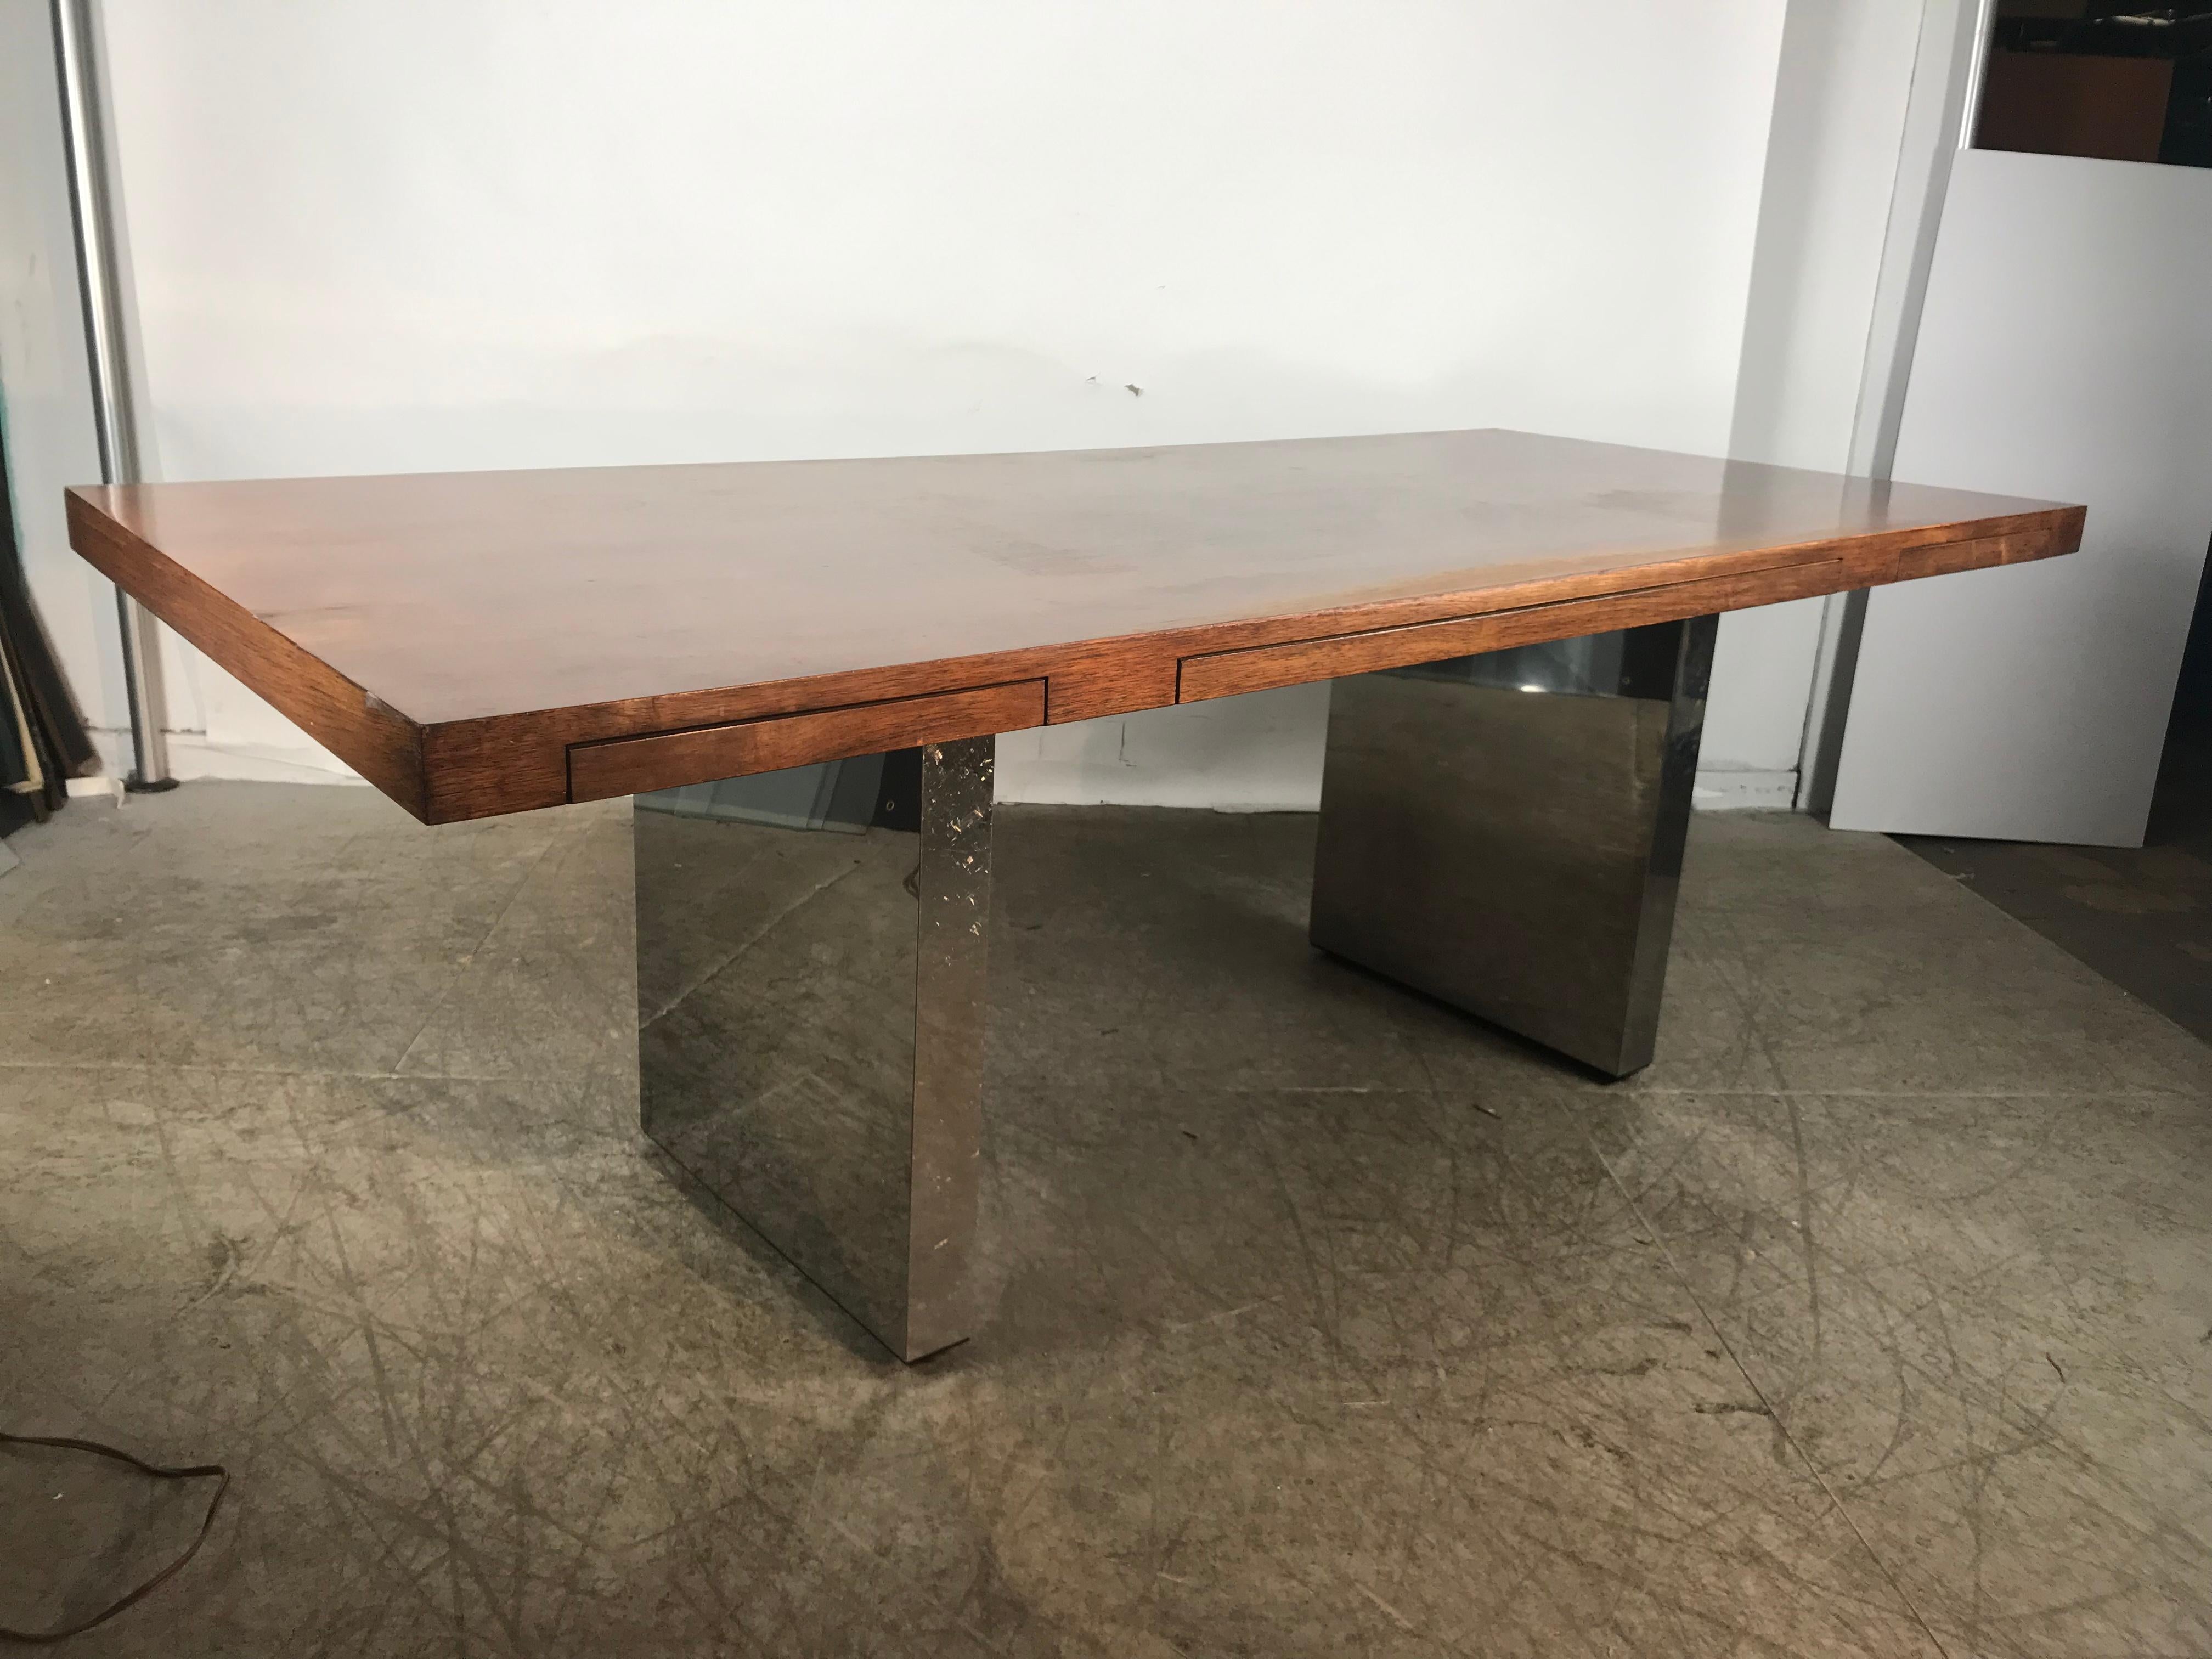 Classic 1970s executive desk,, Nice rosewood veneer and polished chrome base,, Three drawers across the top, retains original large 